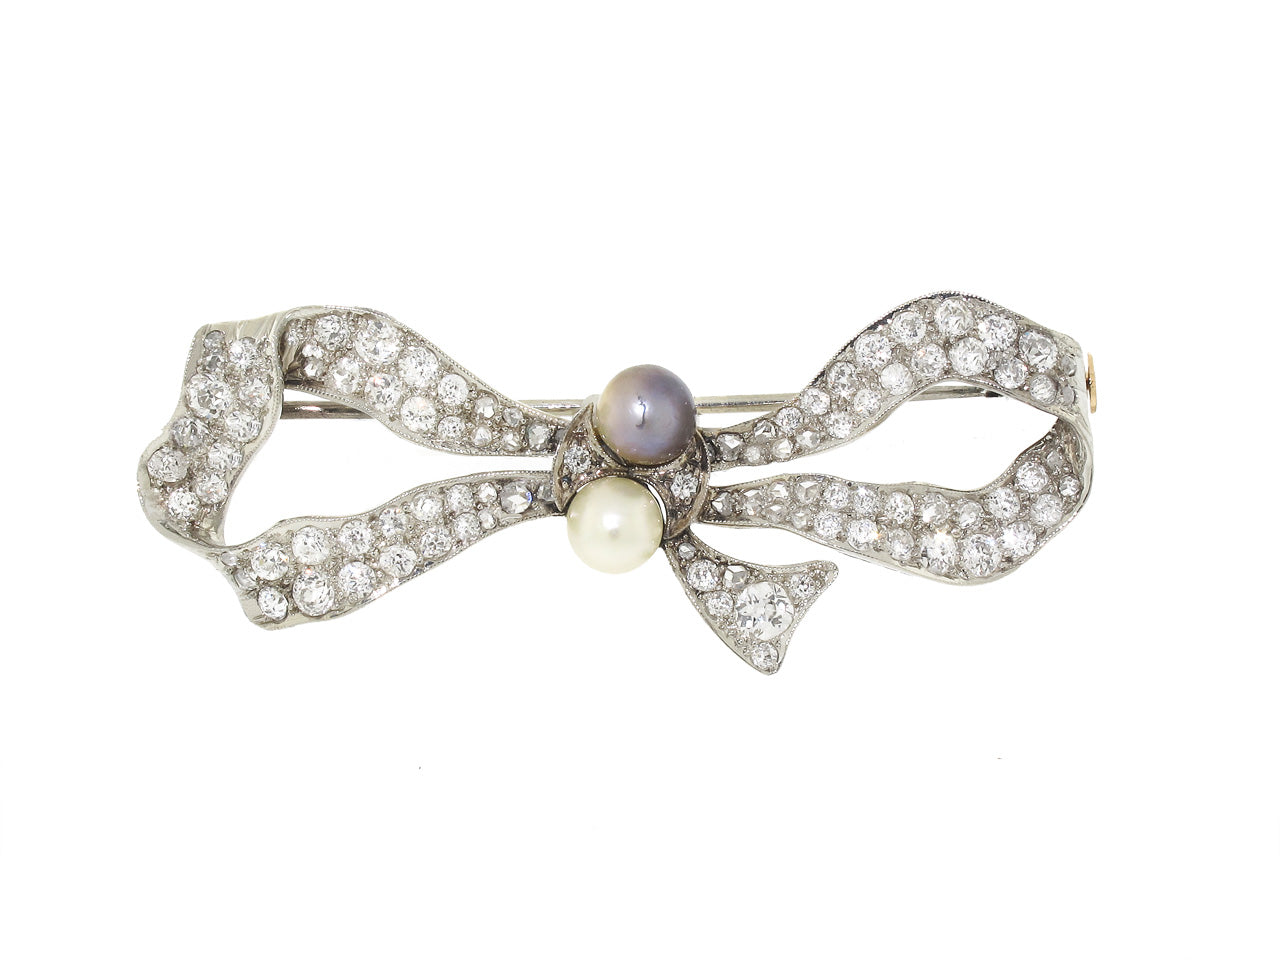 Antique Edwardian Diamond and Natural Pearl Bow Brooch in Platinum